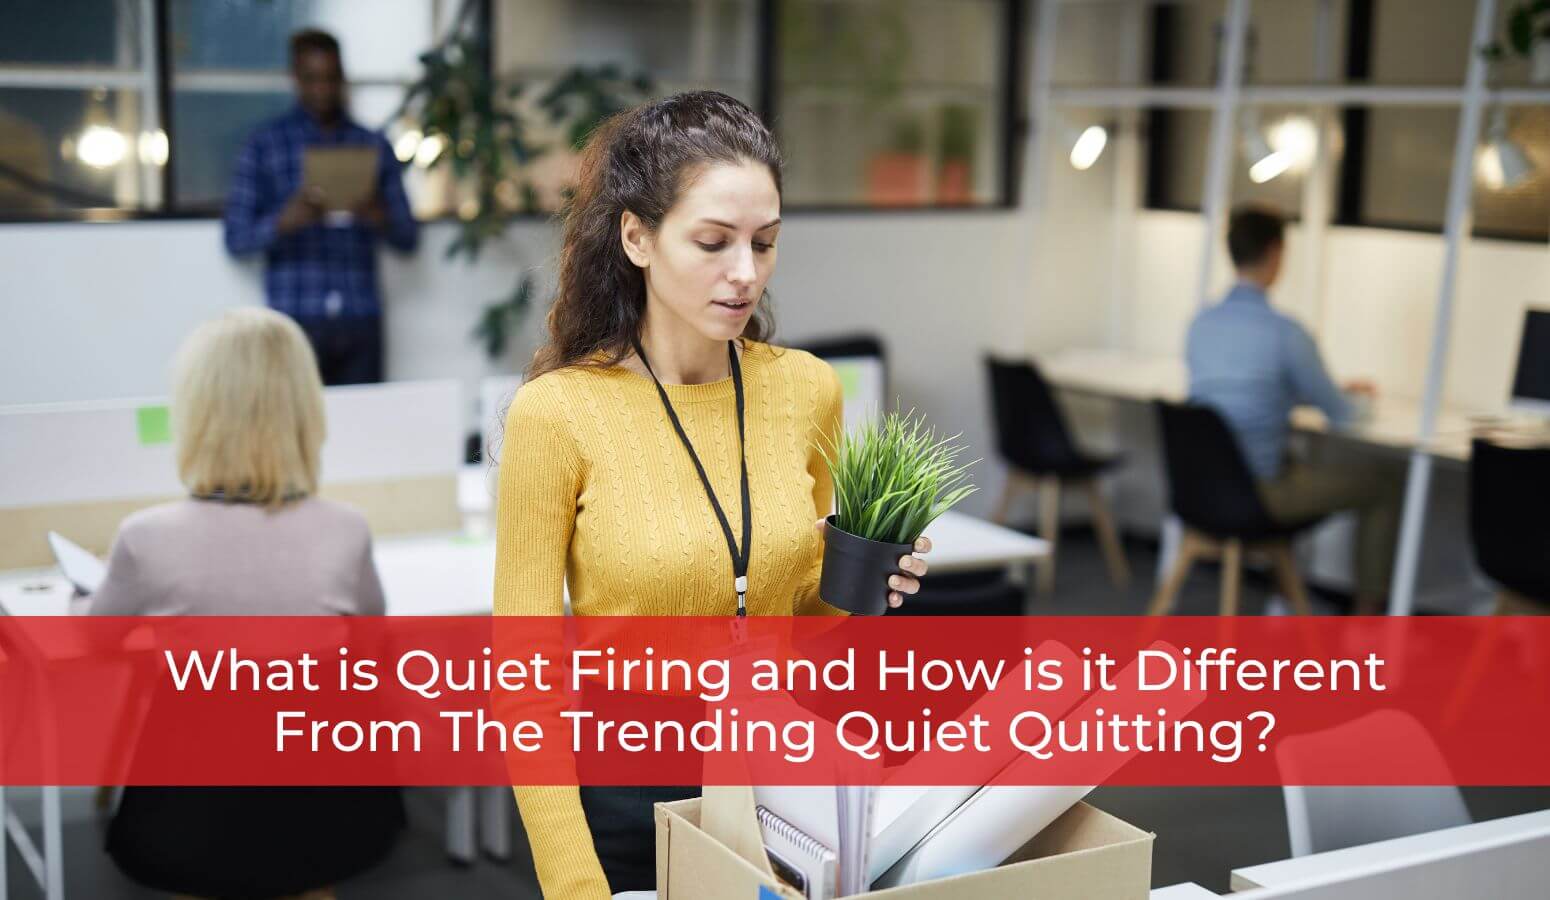 Featured image for “What is Quiet Firing and How is it Different From The Trending Quiet Quitting?”